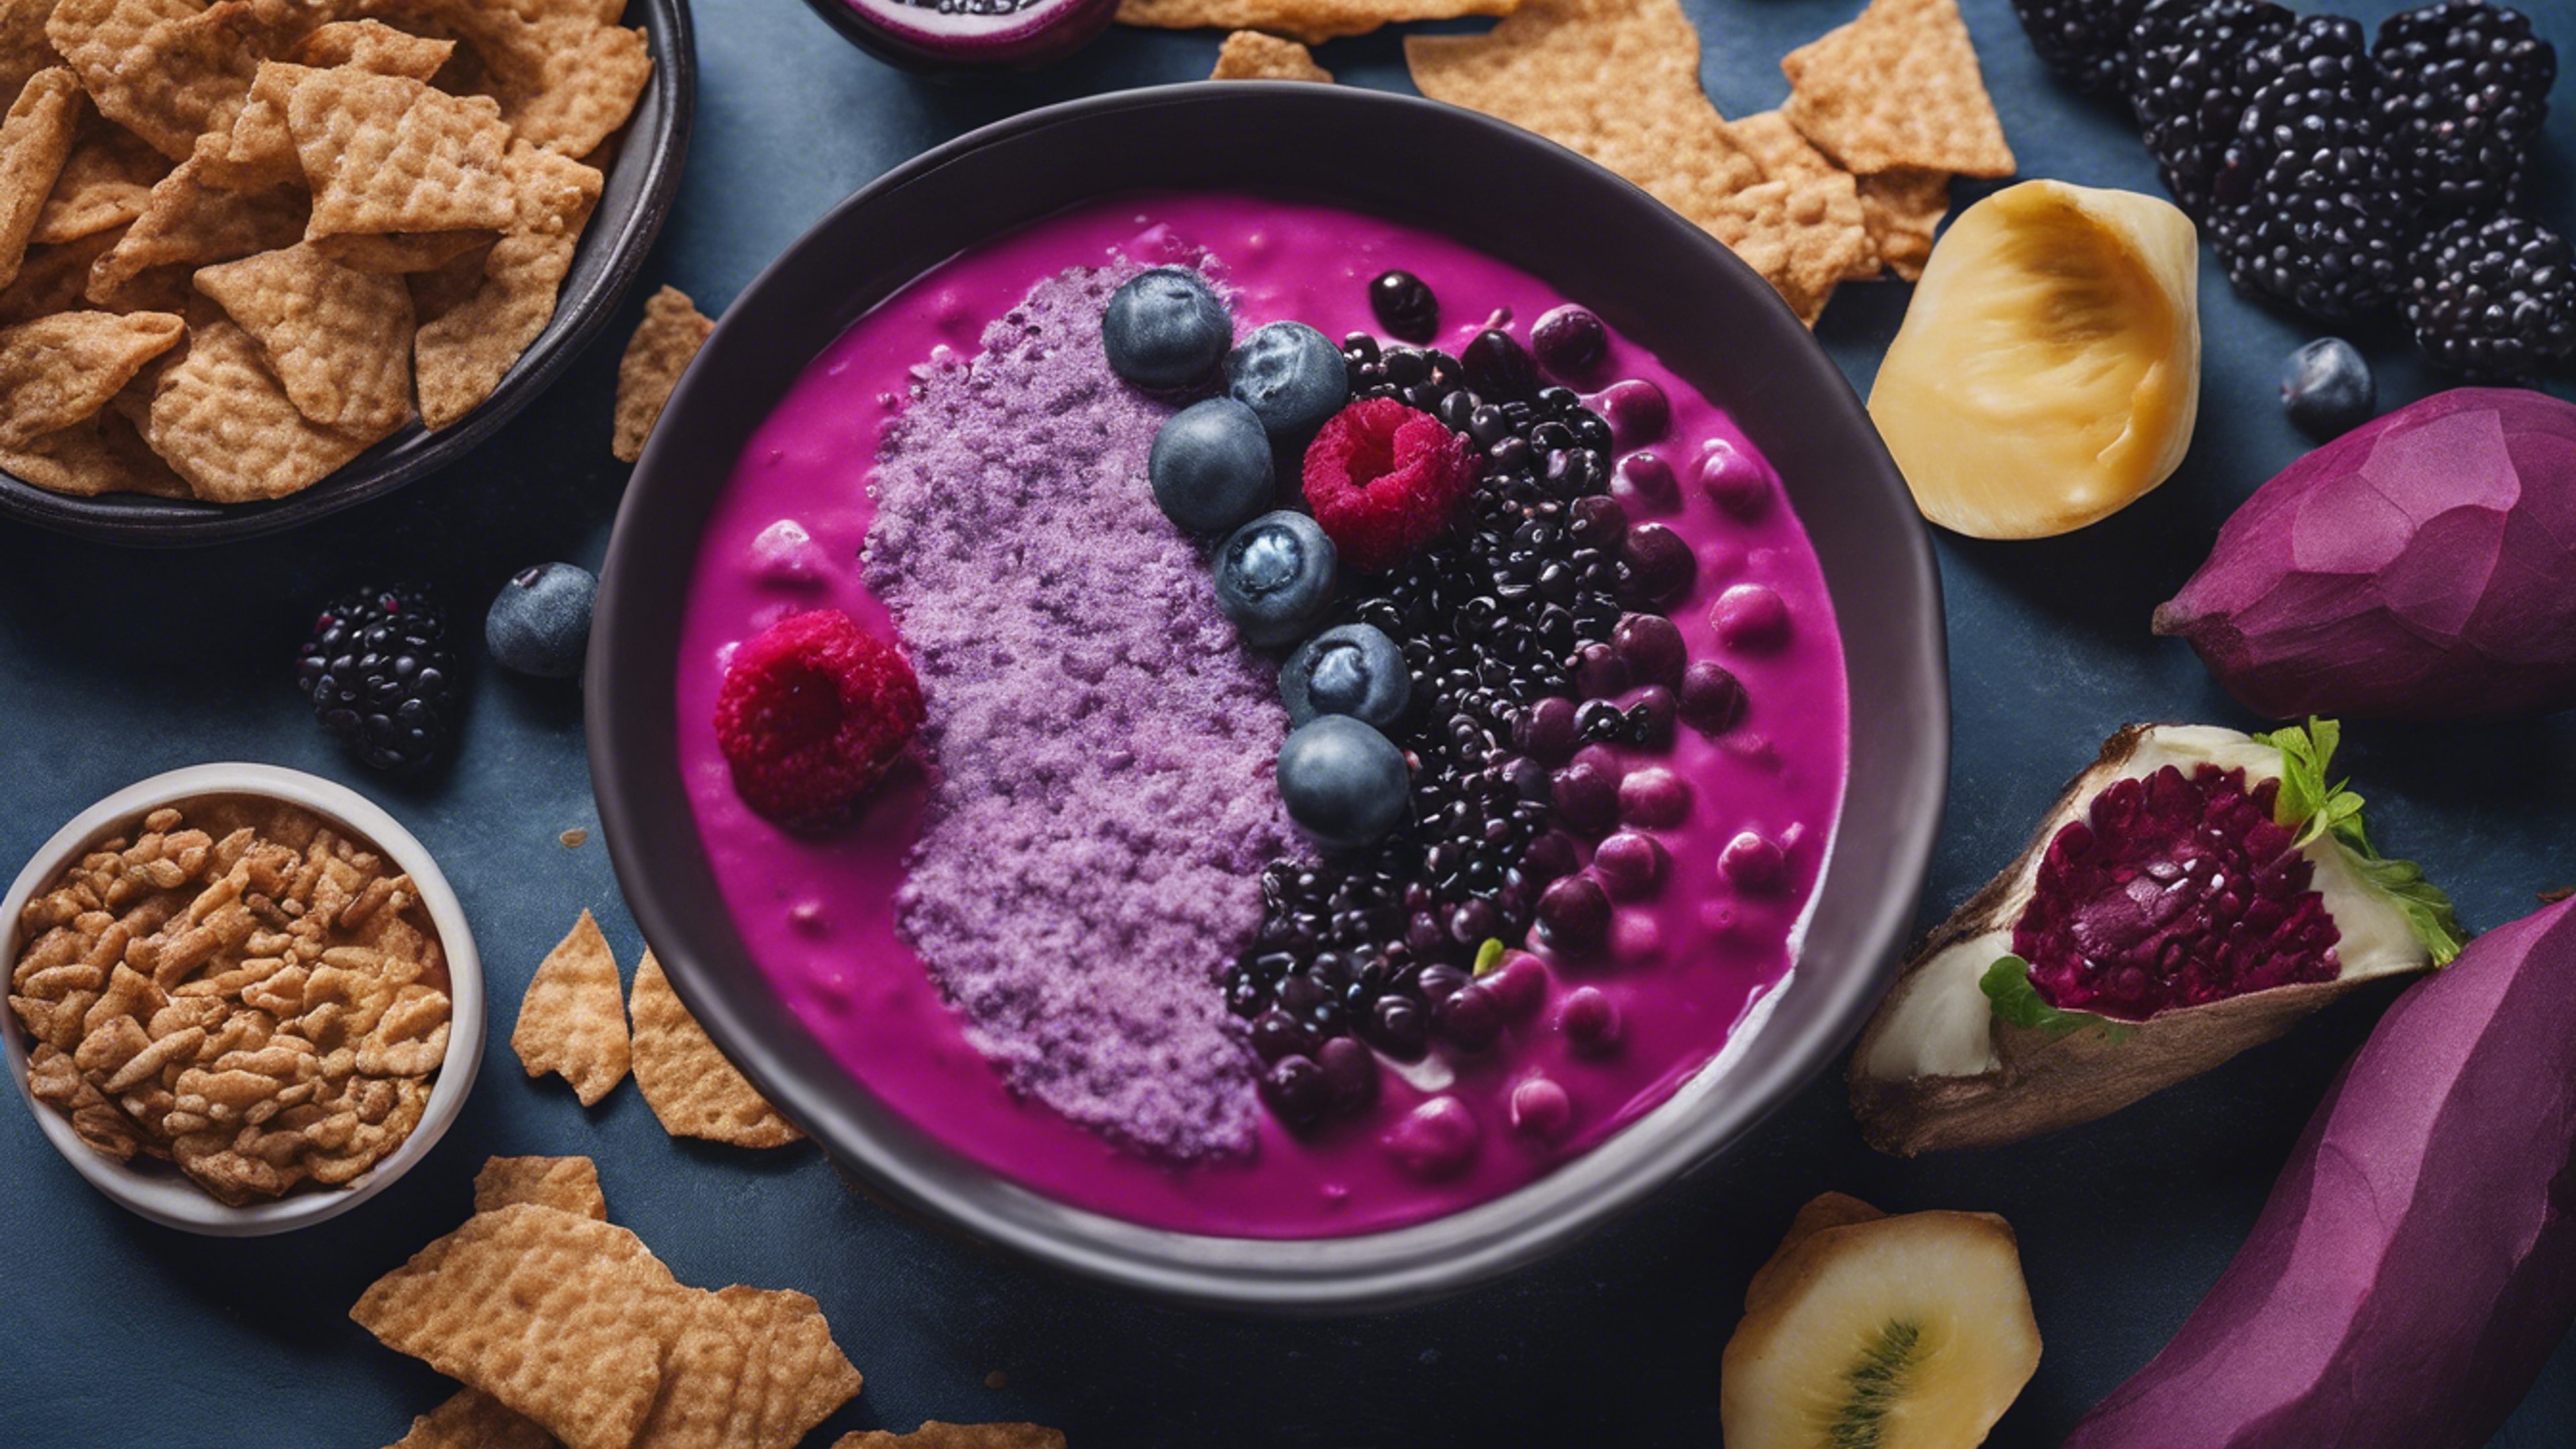 An eye-catching food collage, with purple foods like acai bowls, blue corn chips, and beetroot soup. Tapeta[72264552455b47748fee]